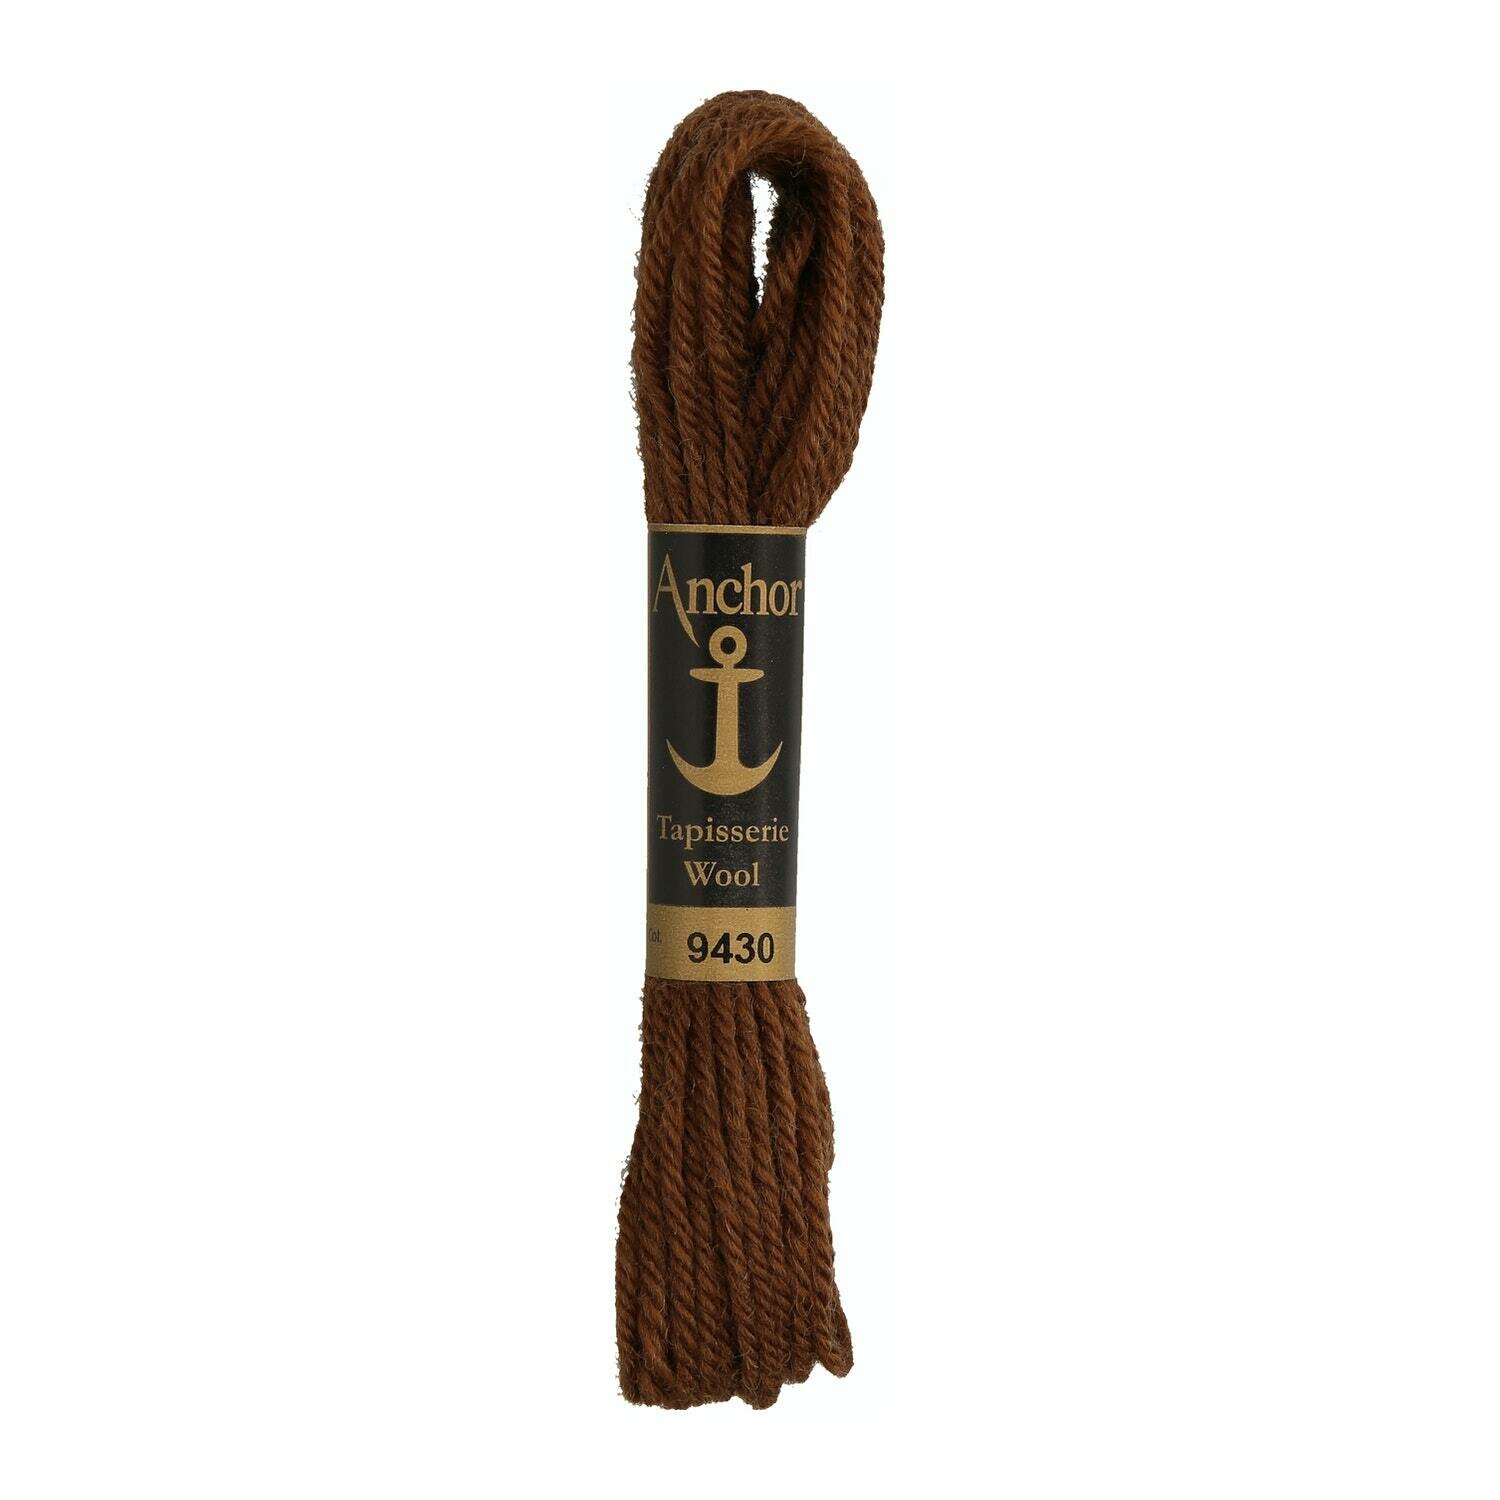 Anchor Tapisserie Wool # 09430